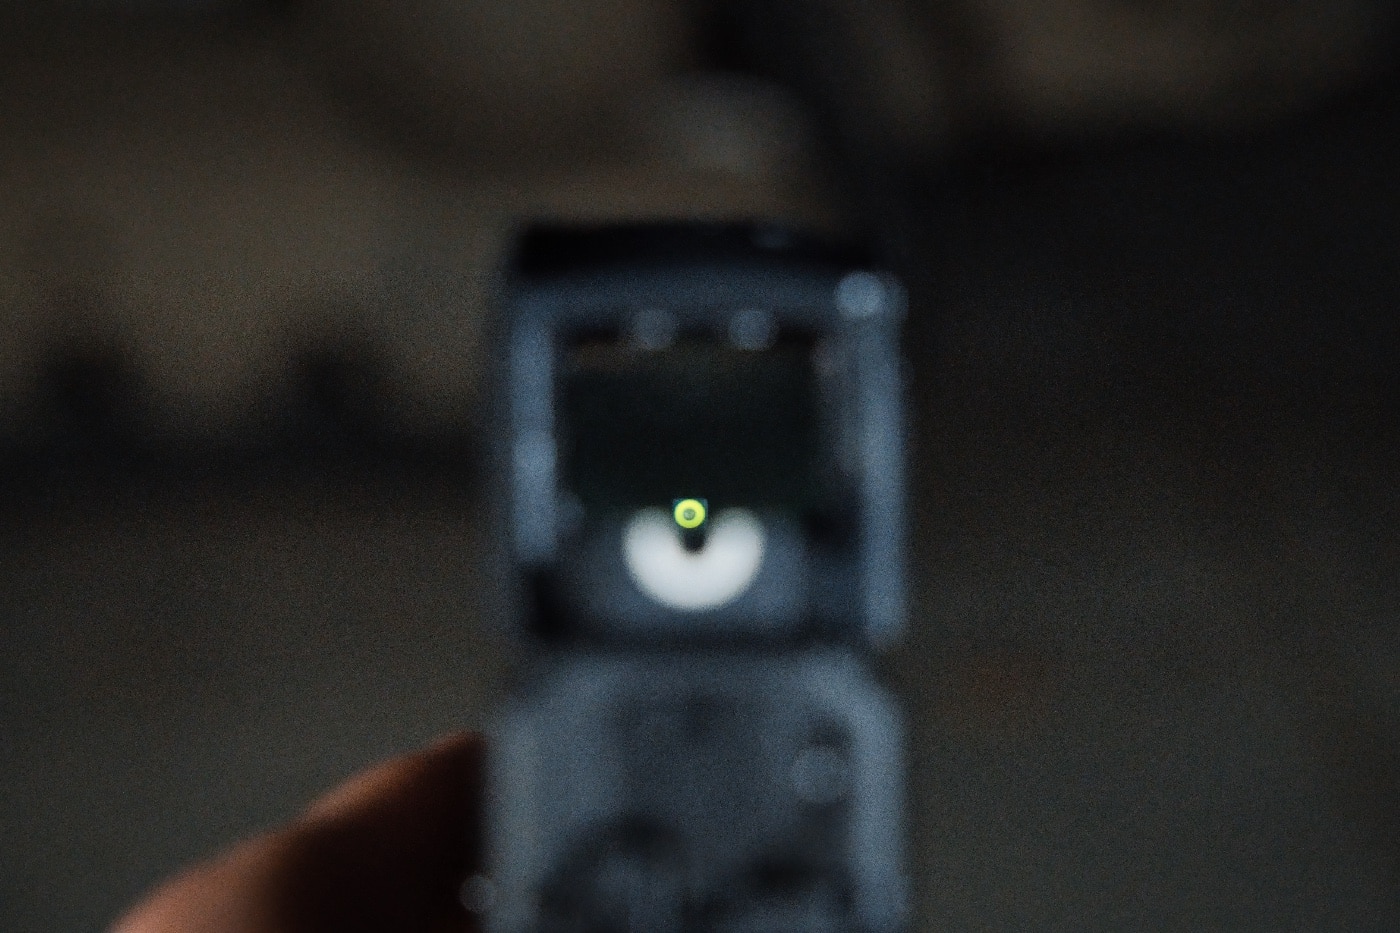 As seen in this photo, the author demonstrates how you can co-witness the factory u-dot sights with the MPS sight. The u-dot sights use a tritium vial in the front sight that allows you to index it in low to no light conditions such as at night or in a dark room.